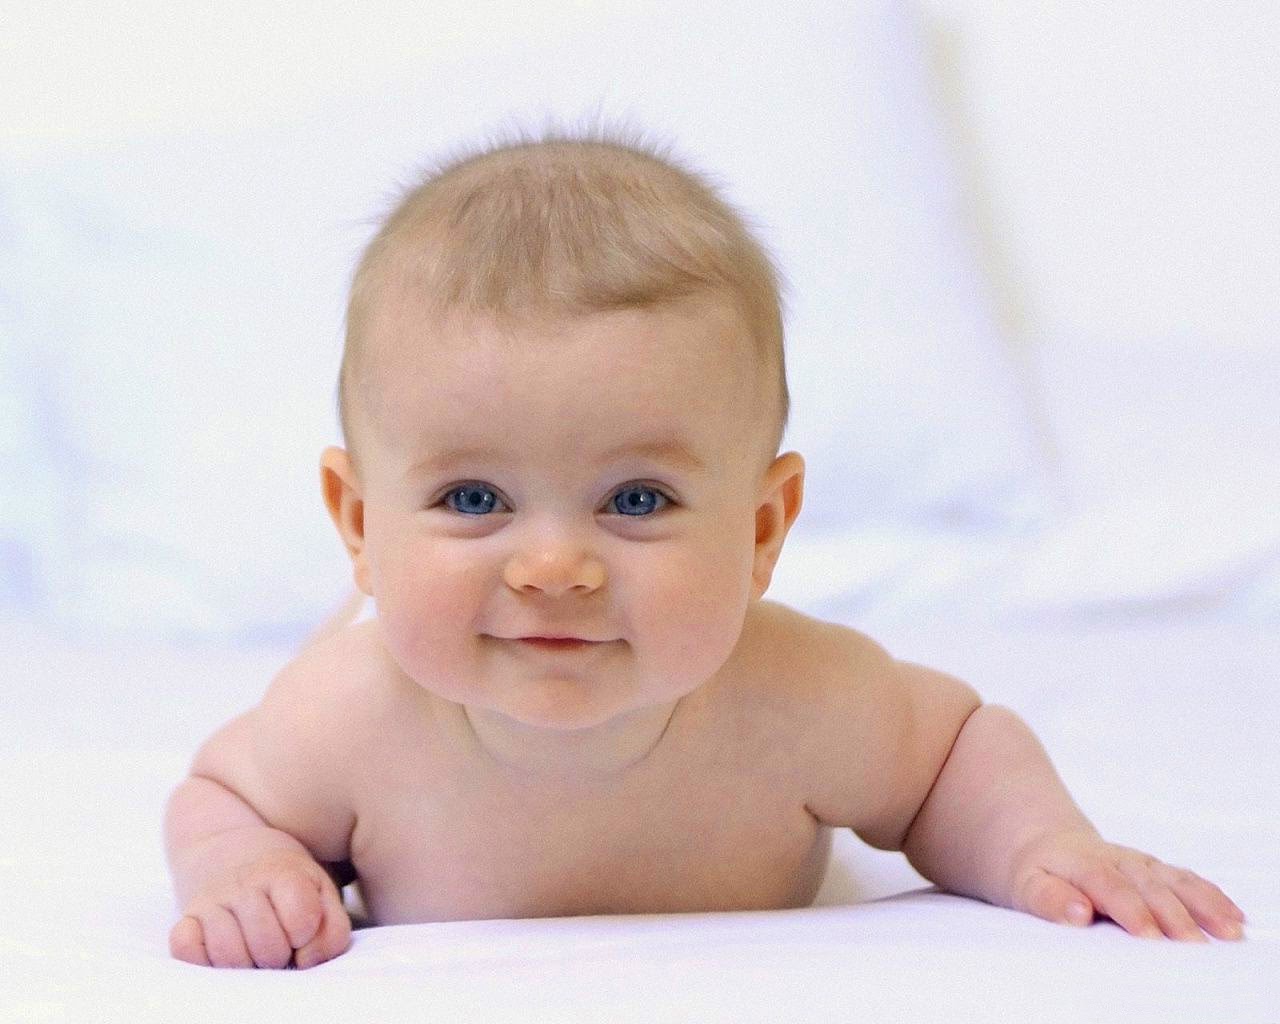 Baby Cute For Wallpaper Pictures